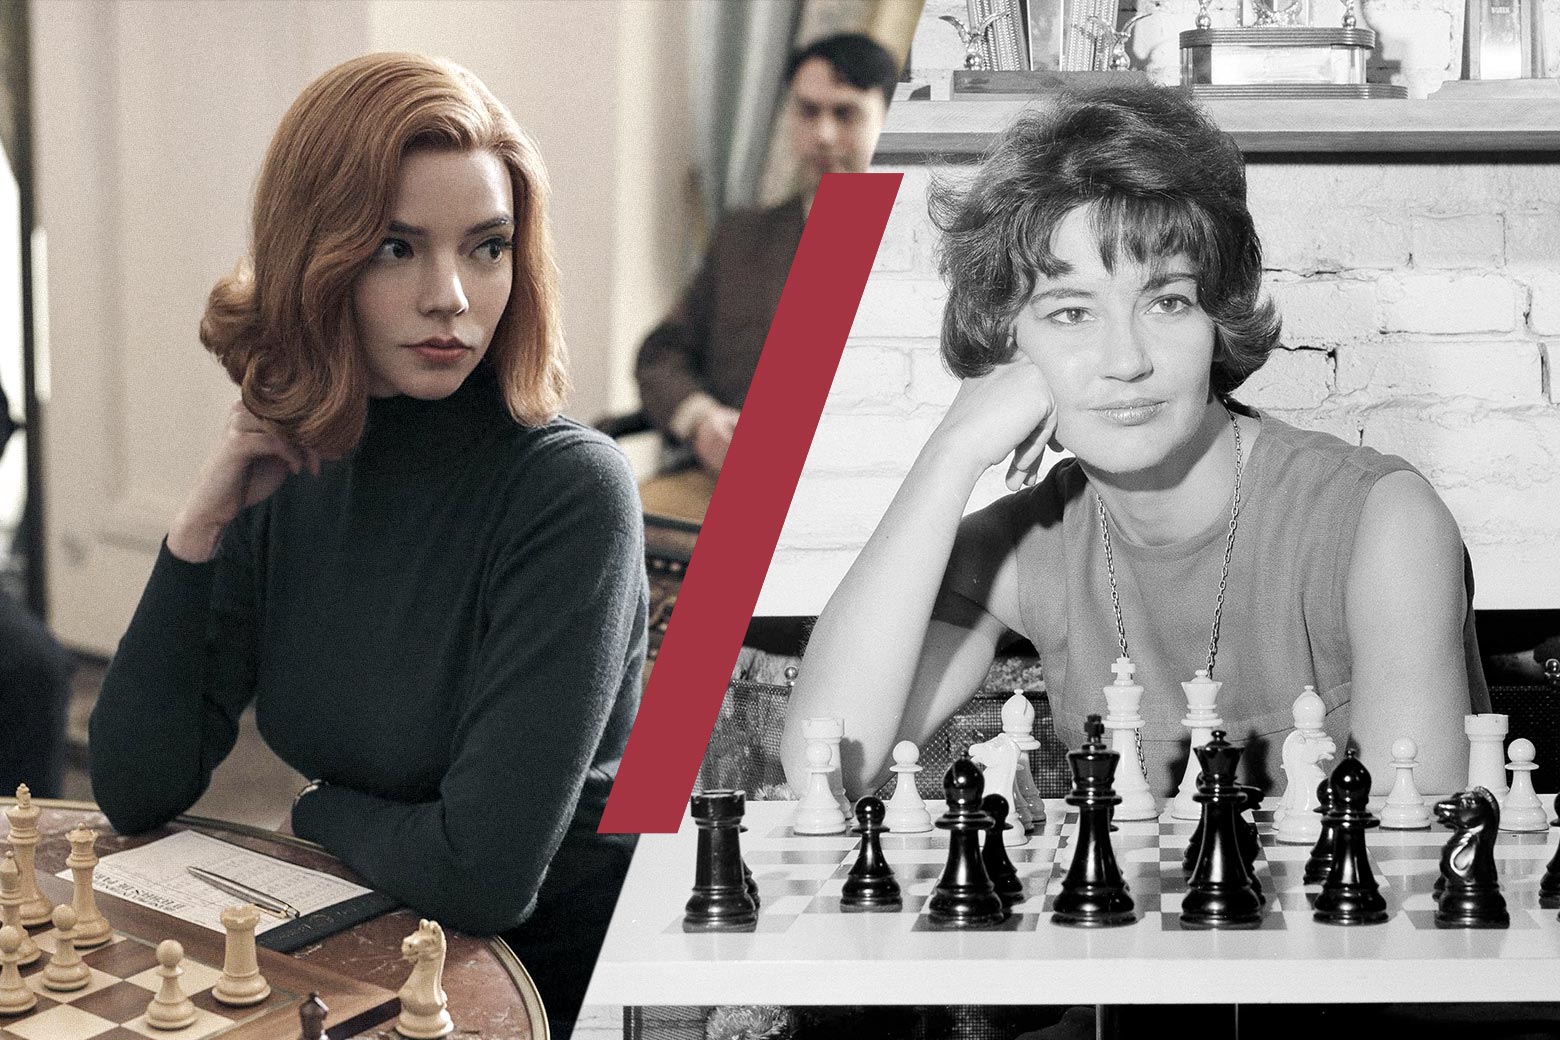 A side-by-side of Beth Harmon, from Netflix's The Queen's Gambit, and real-life chess champion Lisa Lane.